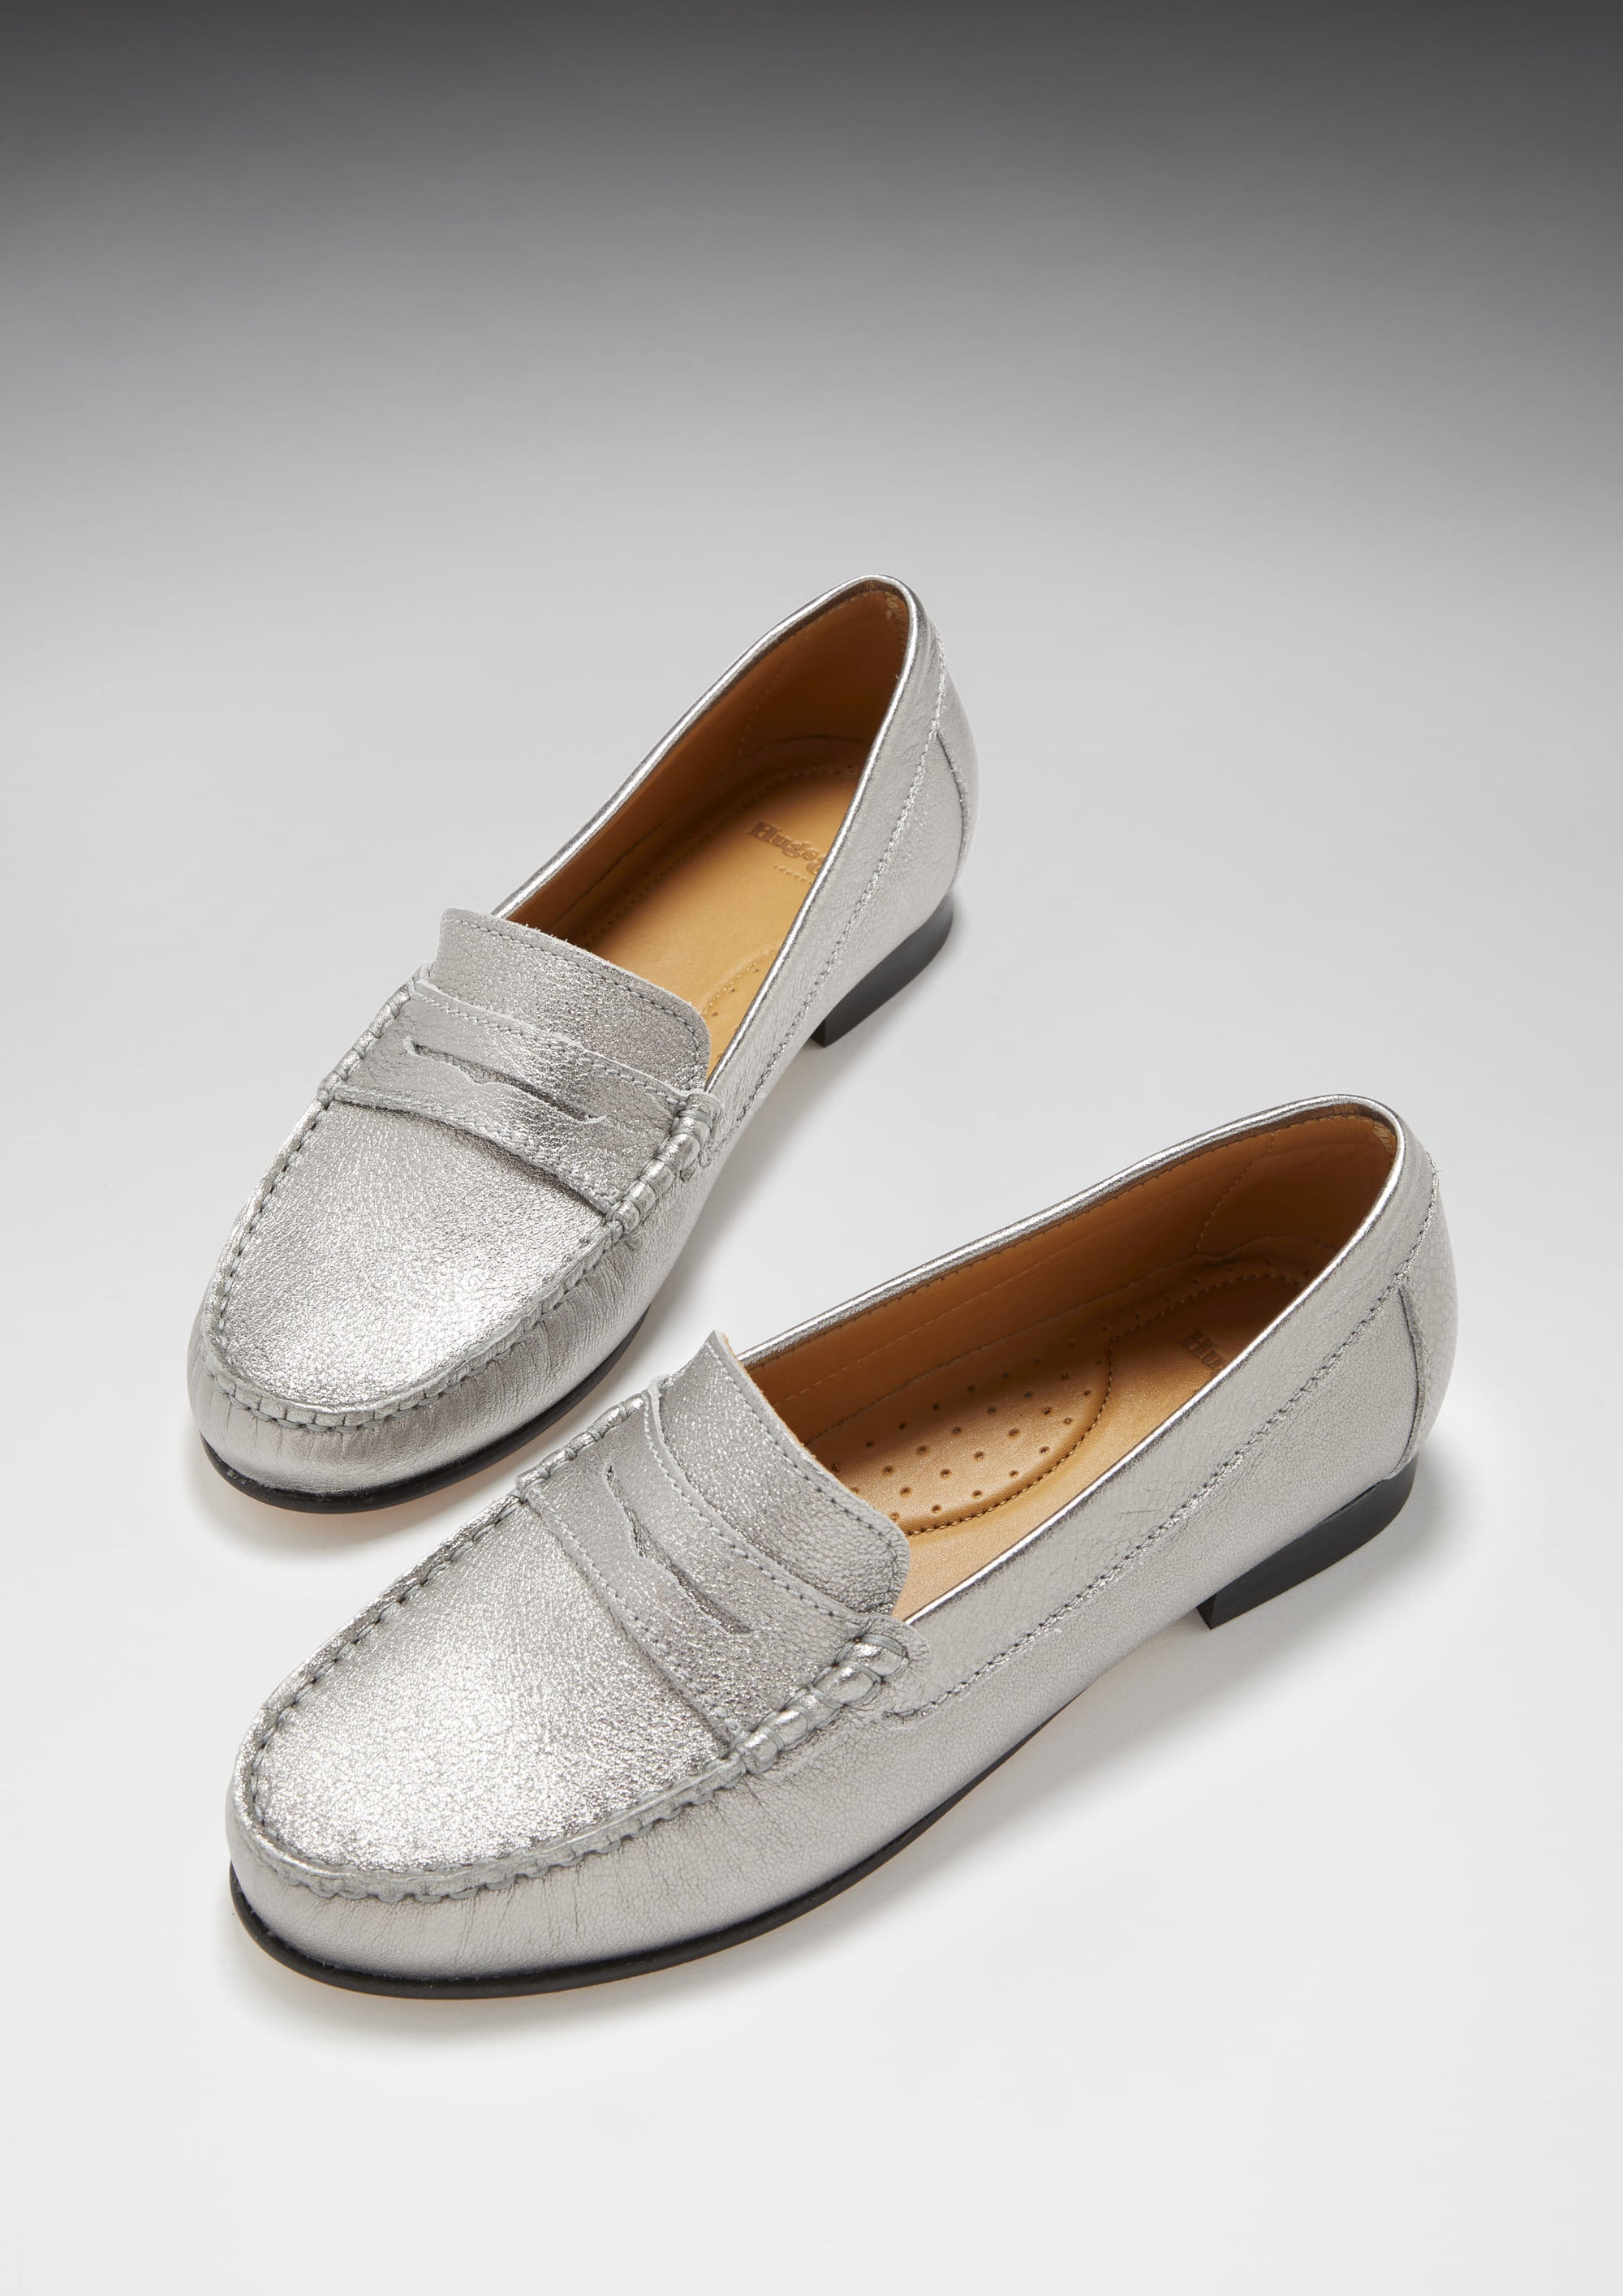 Women's Penny Loafers Leather Sole, titanium metallic leather